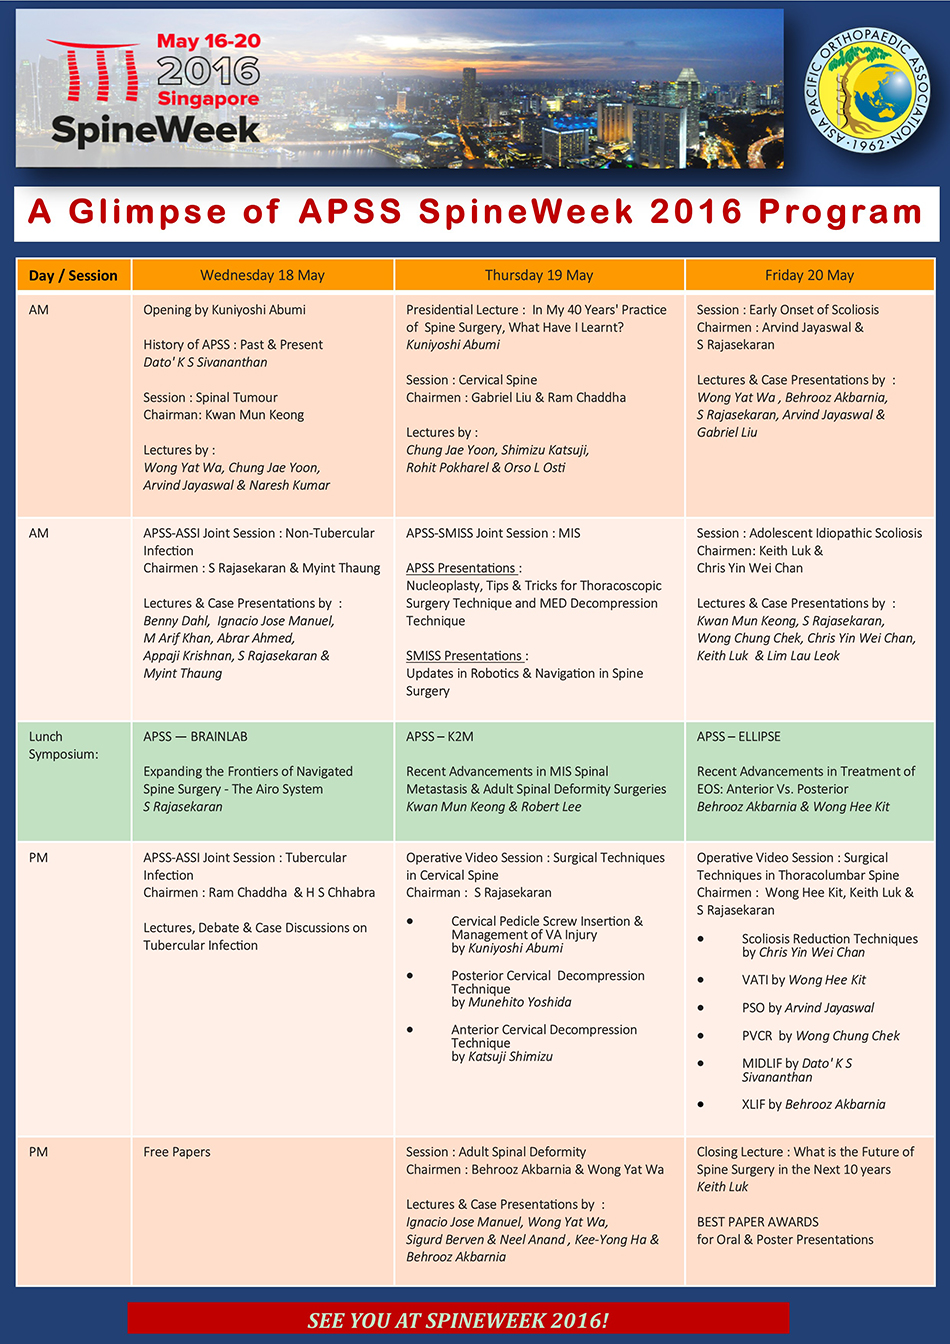 APSS Scientific Programme Daily Highlights